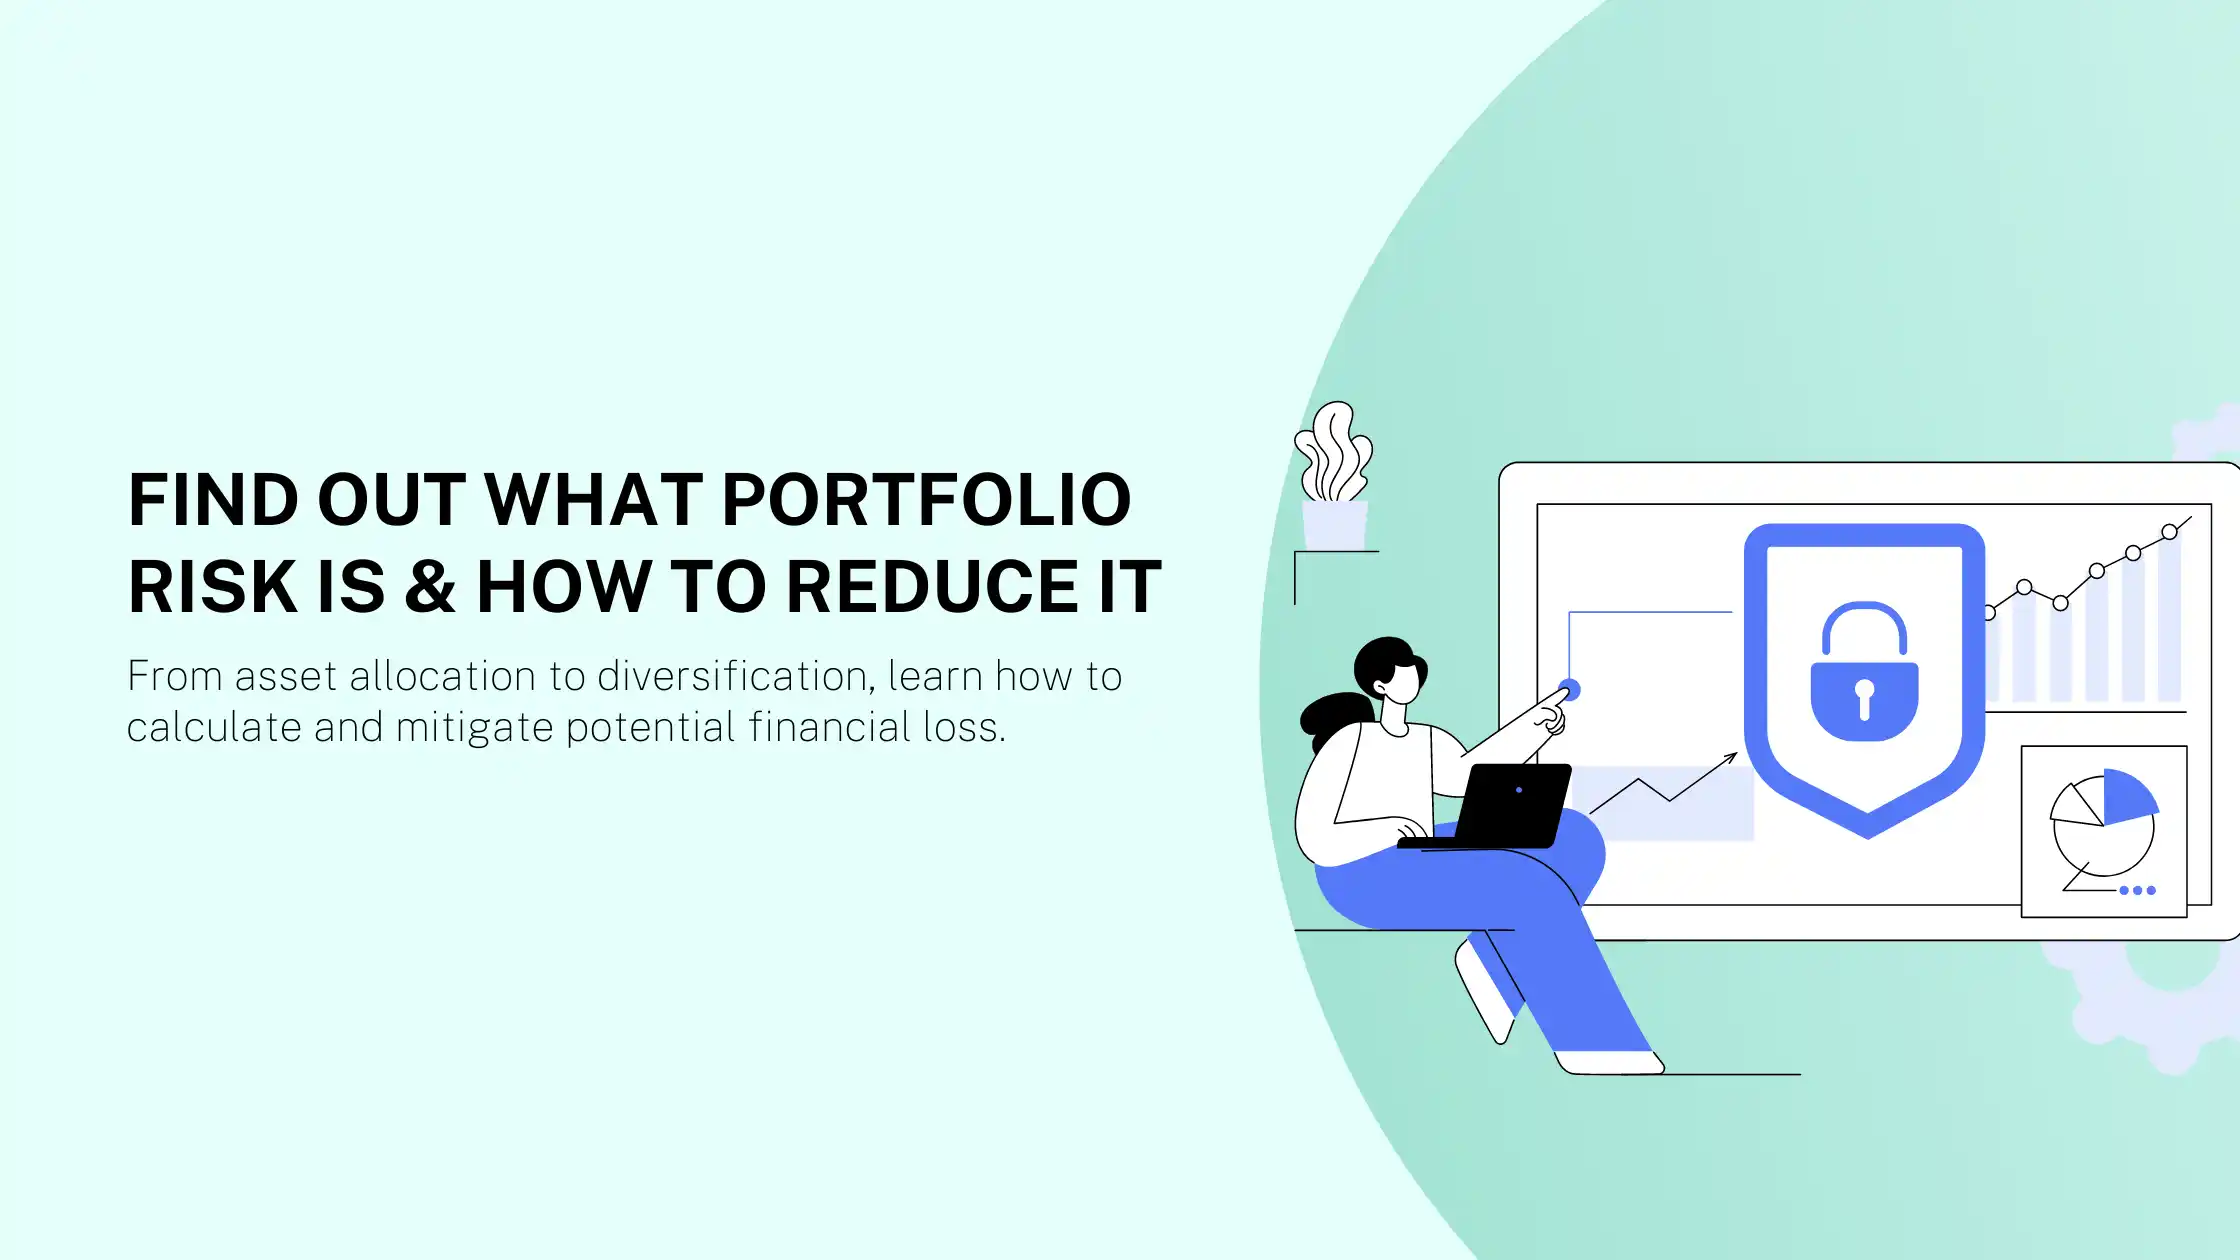 Find Out What Portfolio Risk Is & How to Reduce It